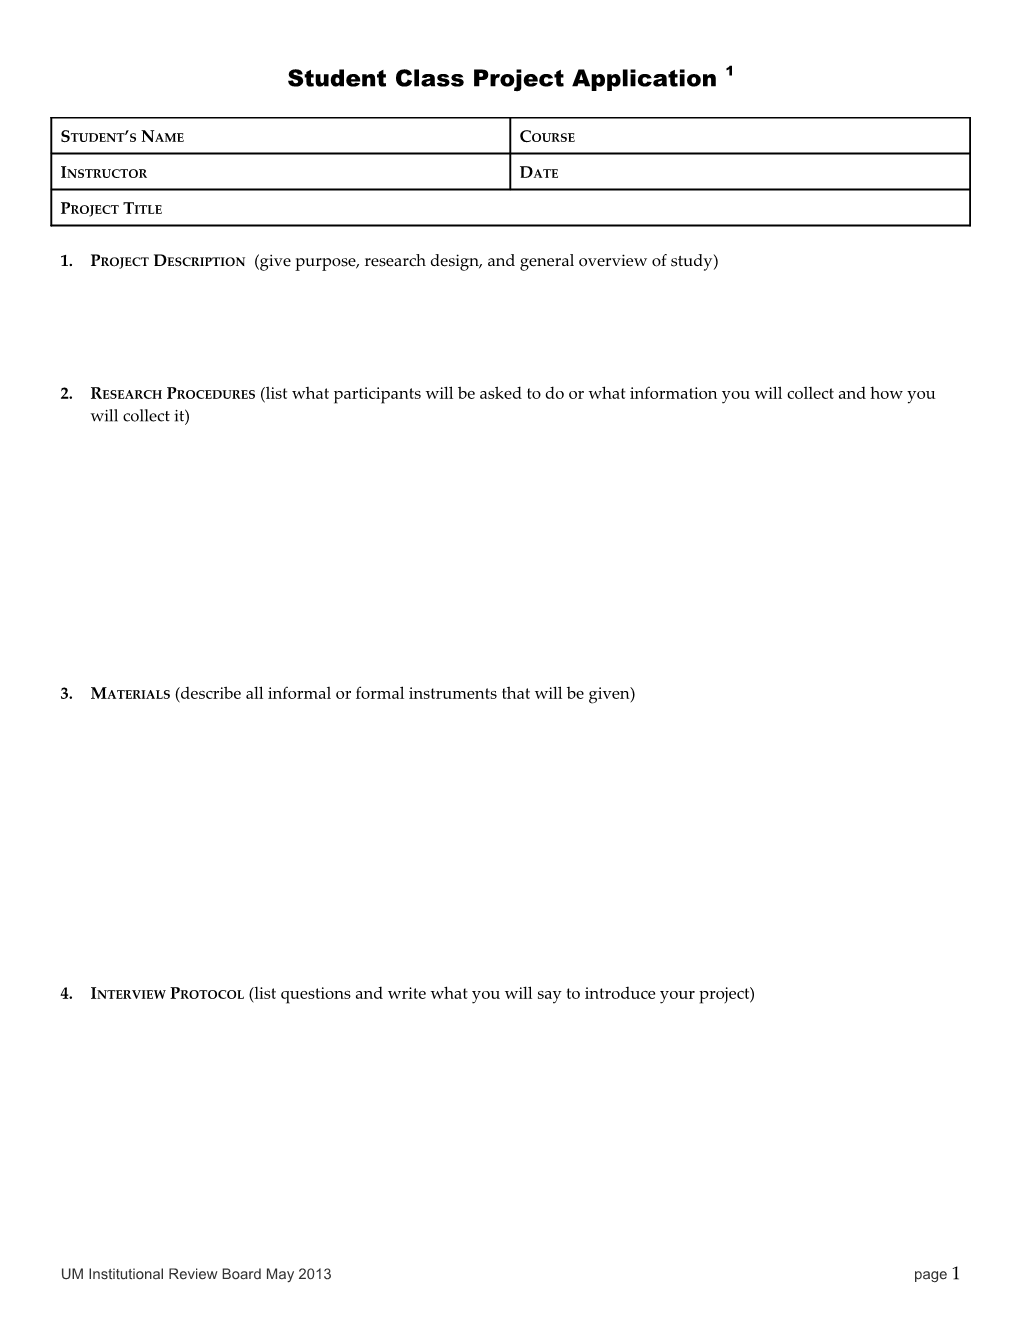 Student Class Project Application 1